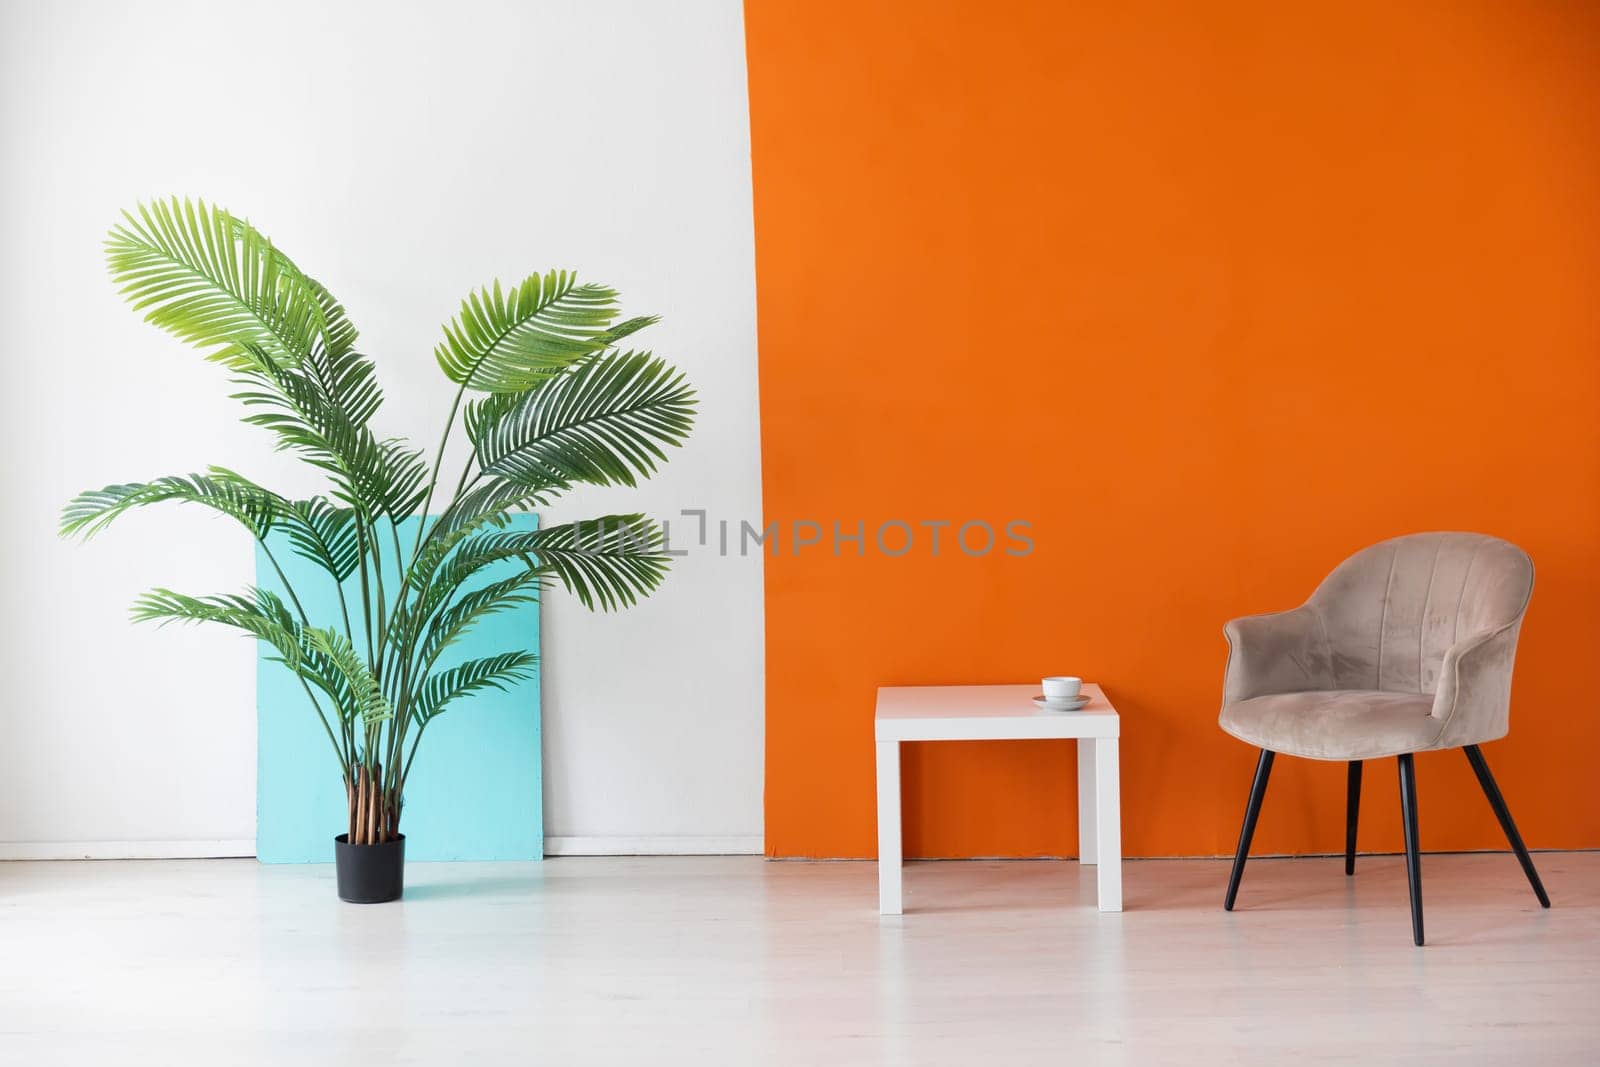 Decorative green plant in the interior of an empty white and orange room by Simakov